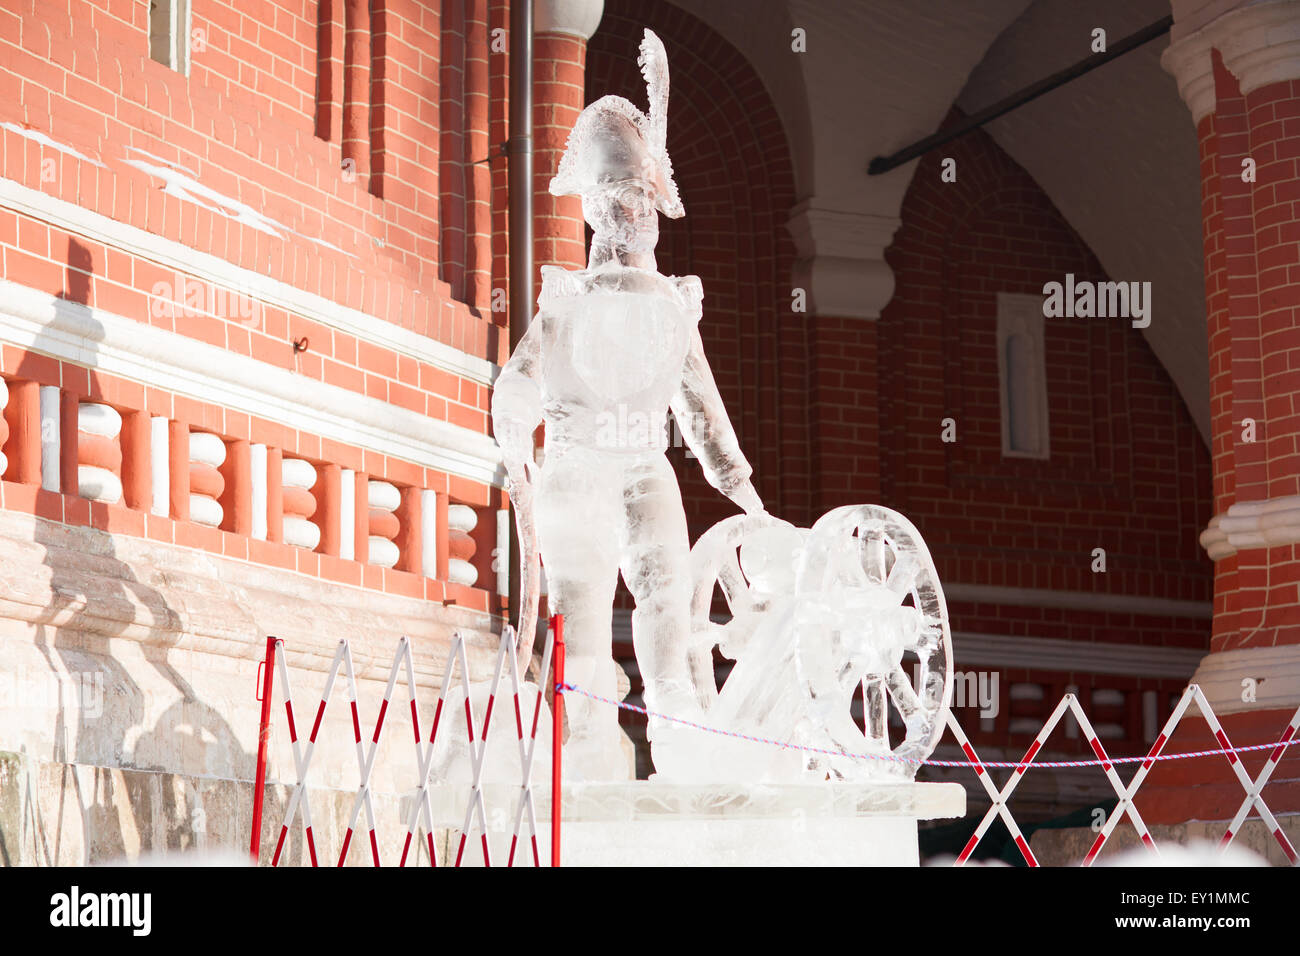 Ice figure by the Moscow St. Basil's cathedral in the sunny winter day Stock Photo